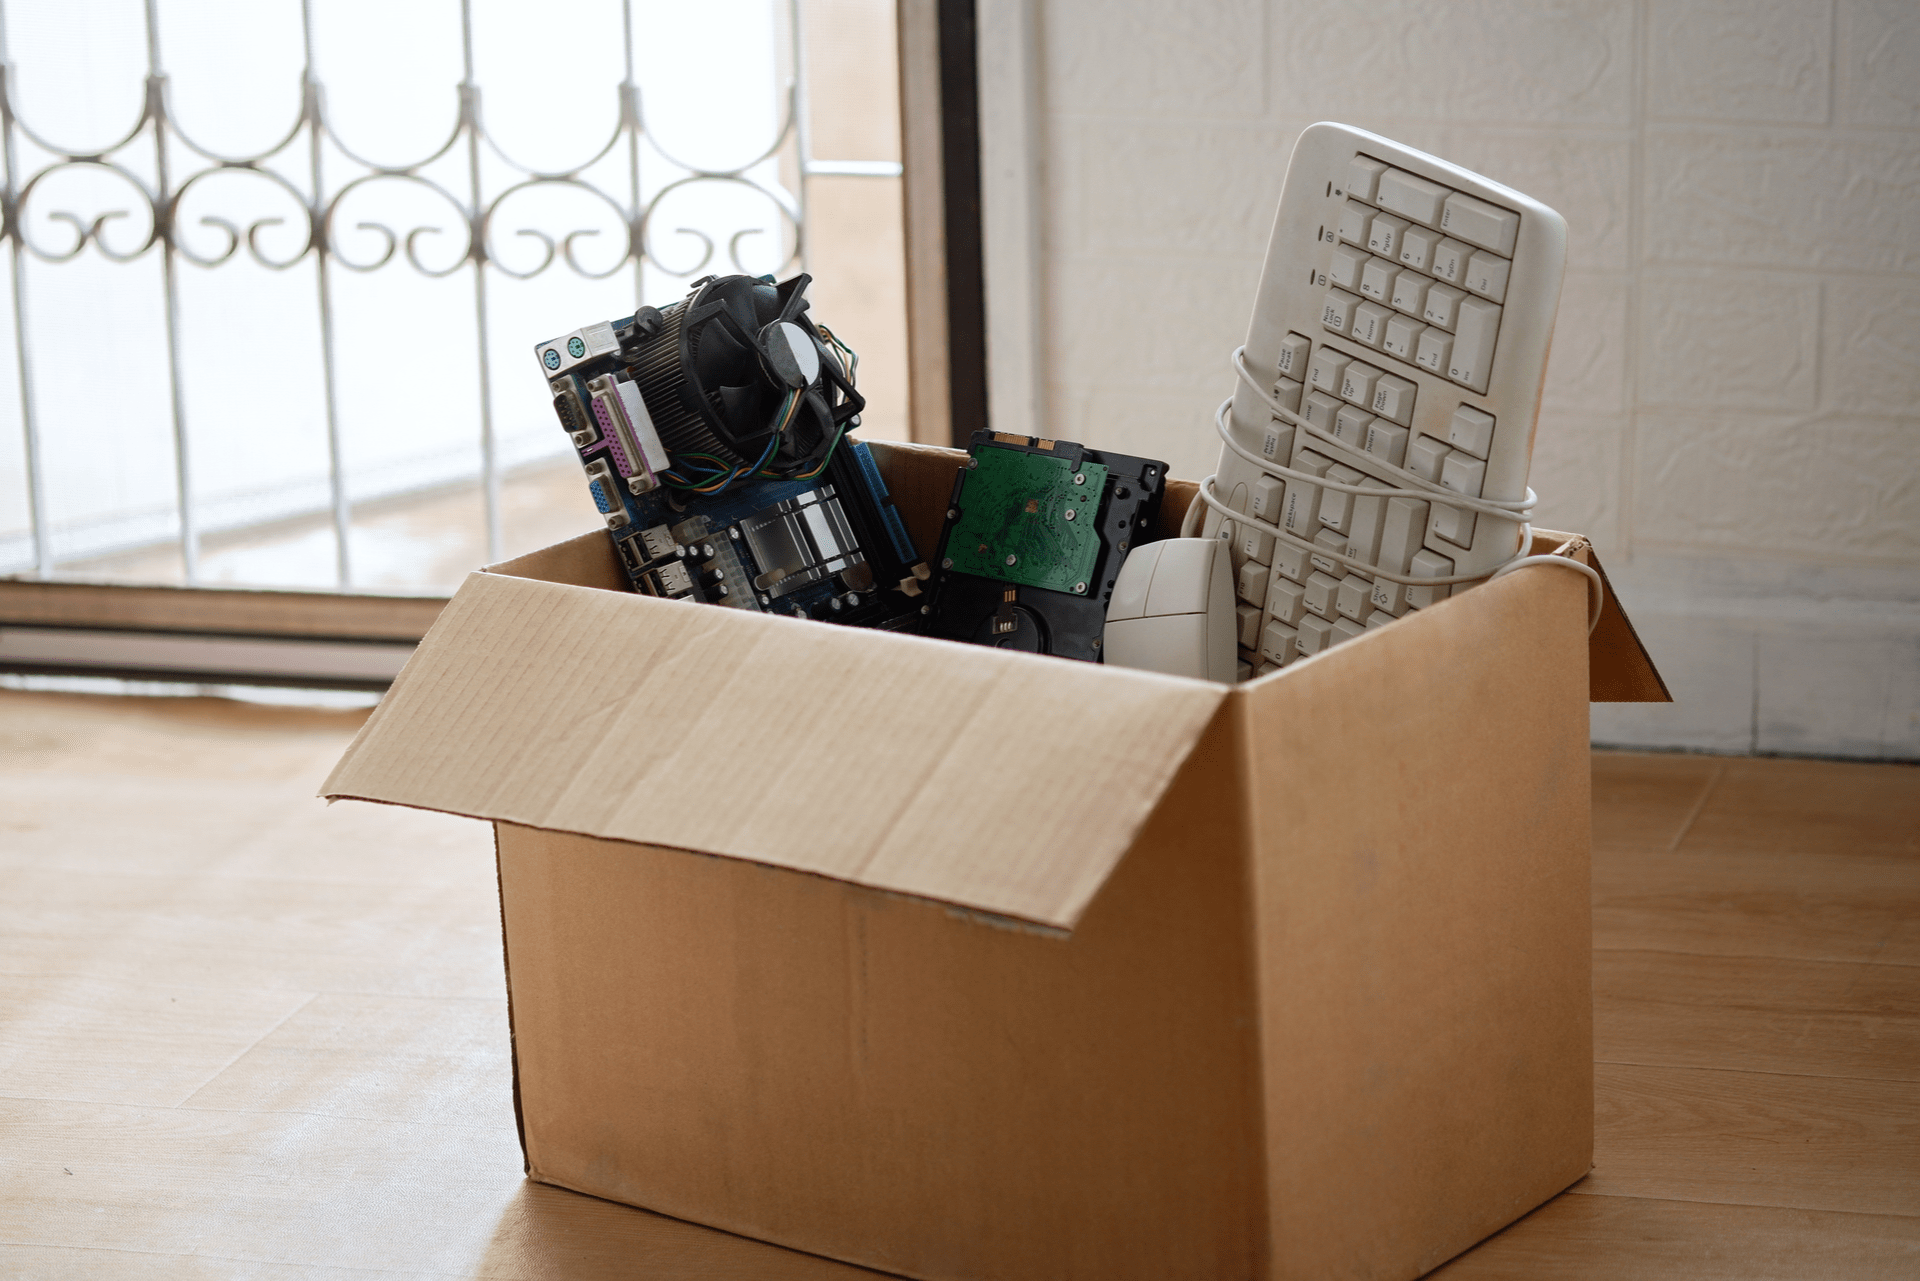 Reason Electronics Recycling in Better than Donation